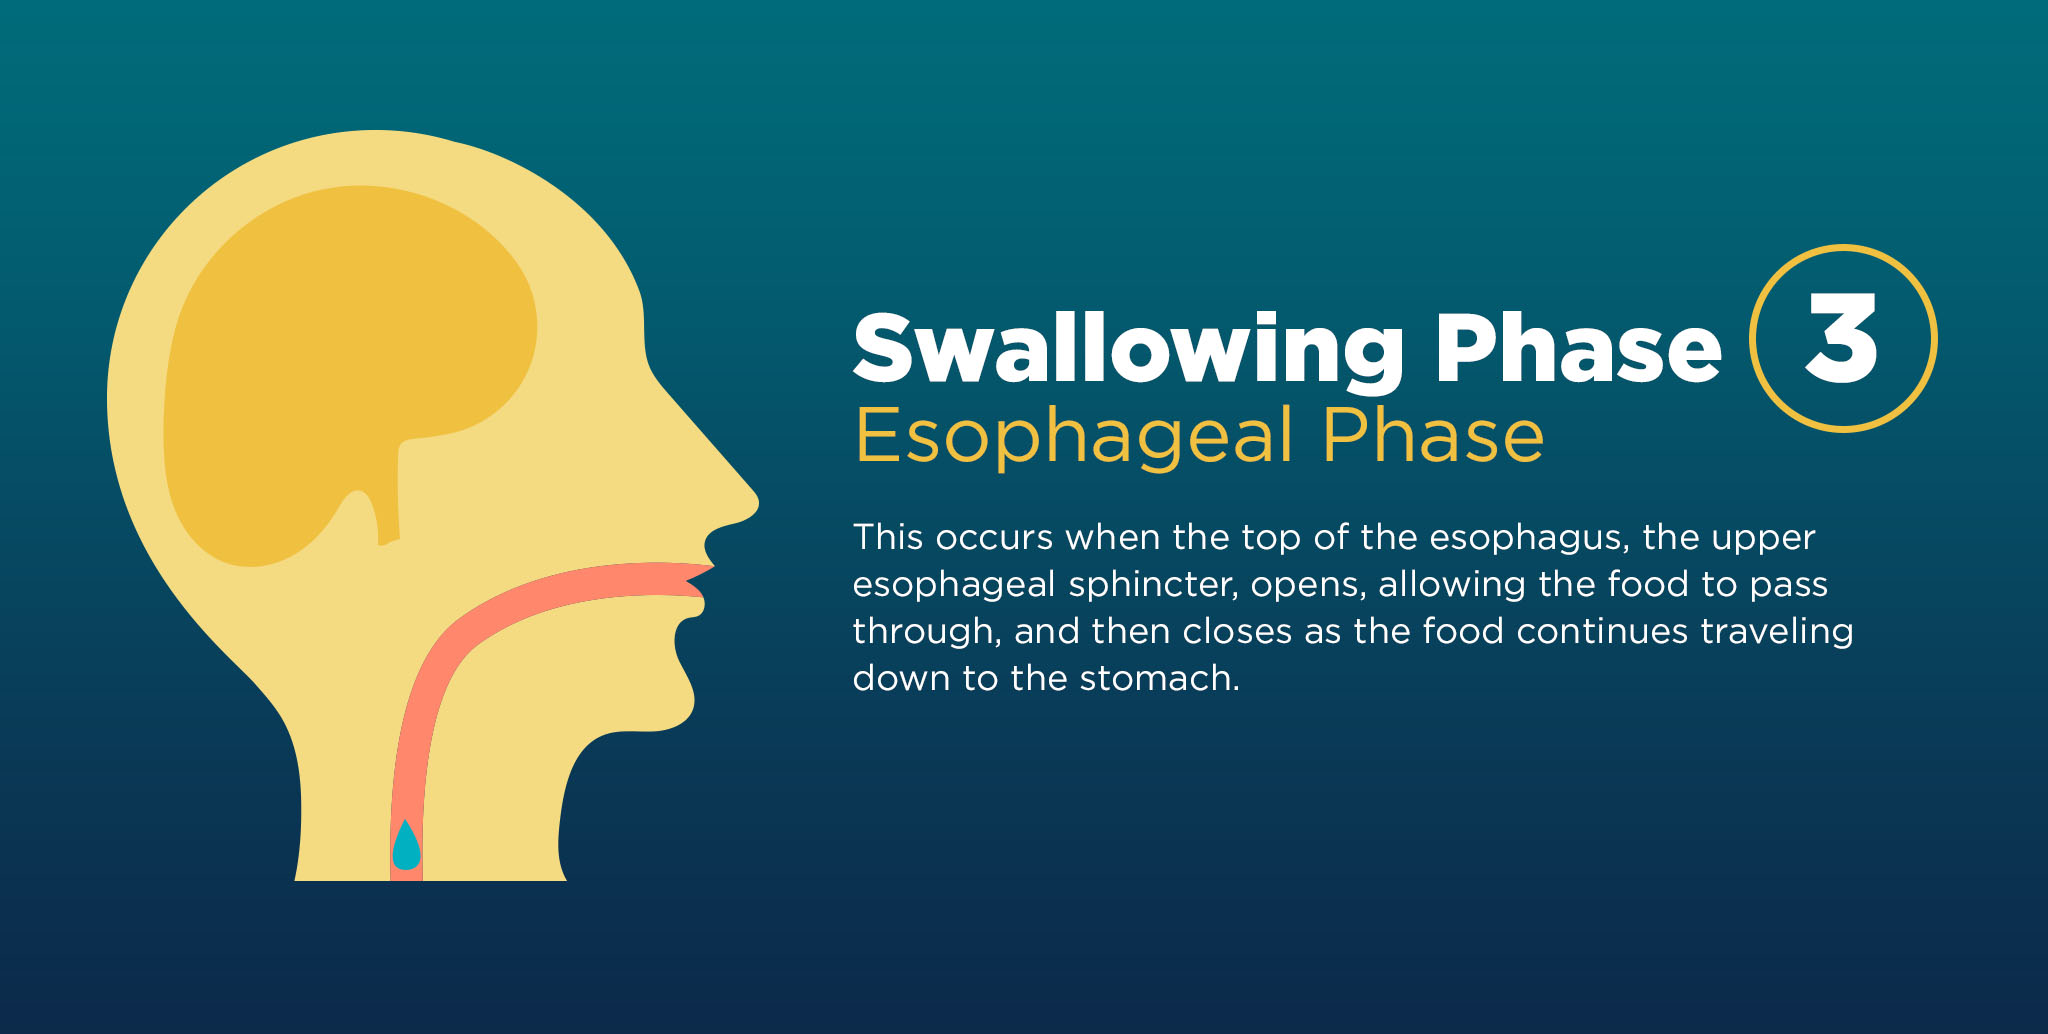 explanation of the third phase of the swallowing process.